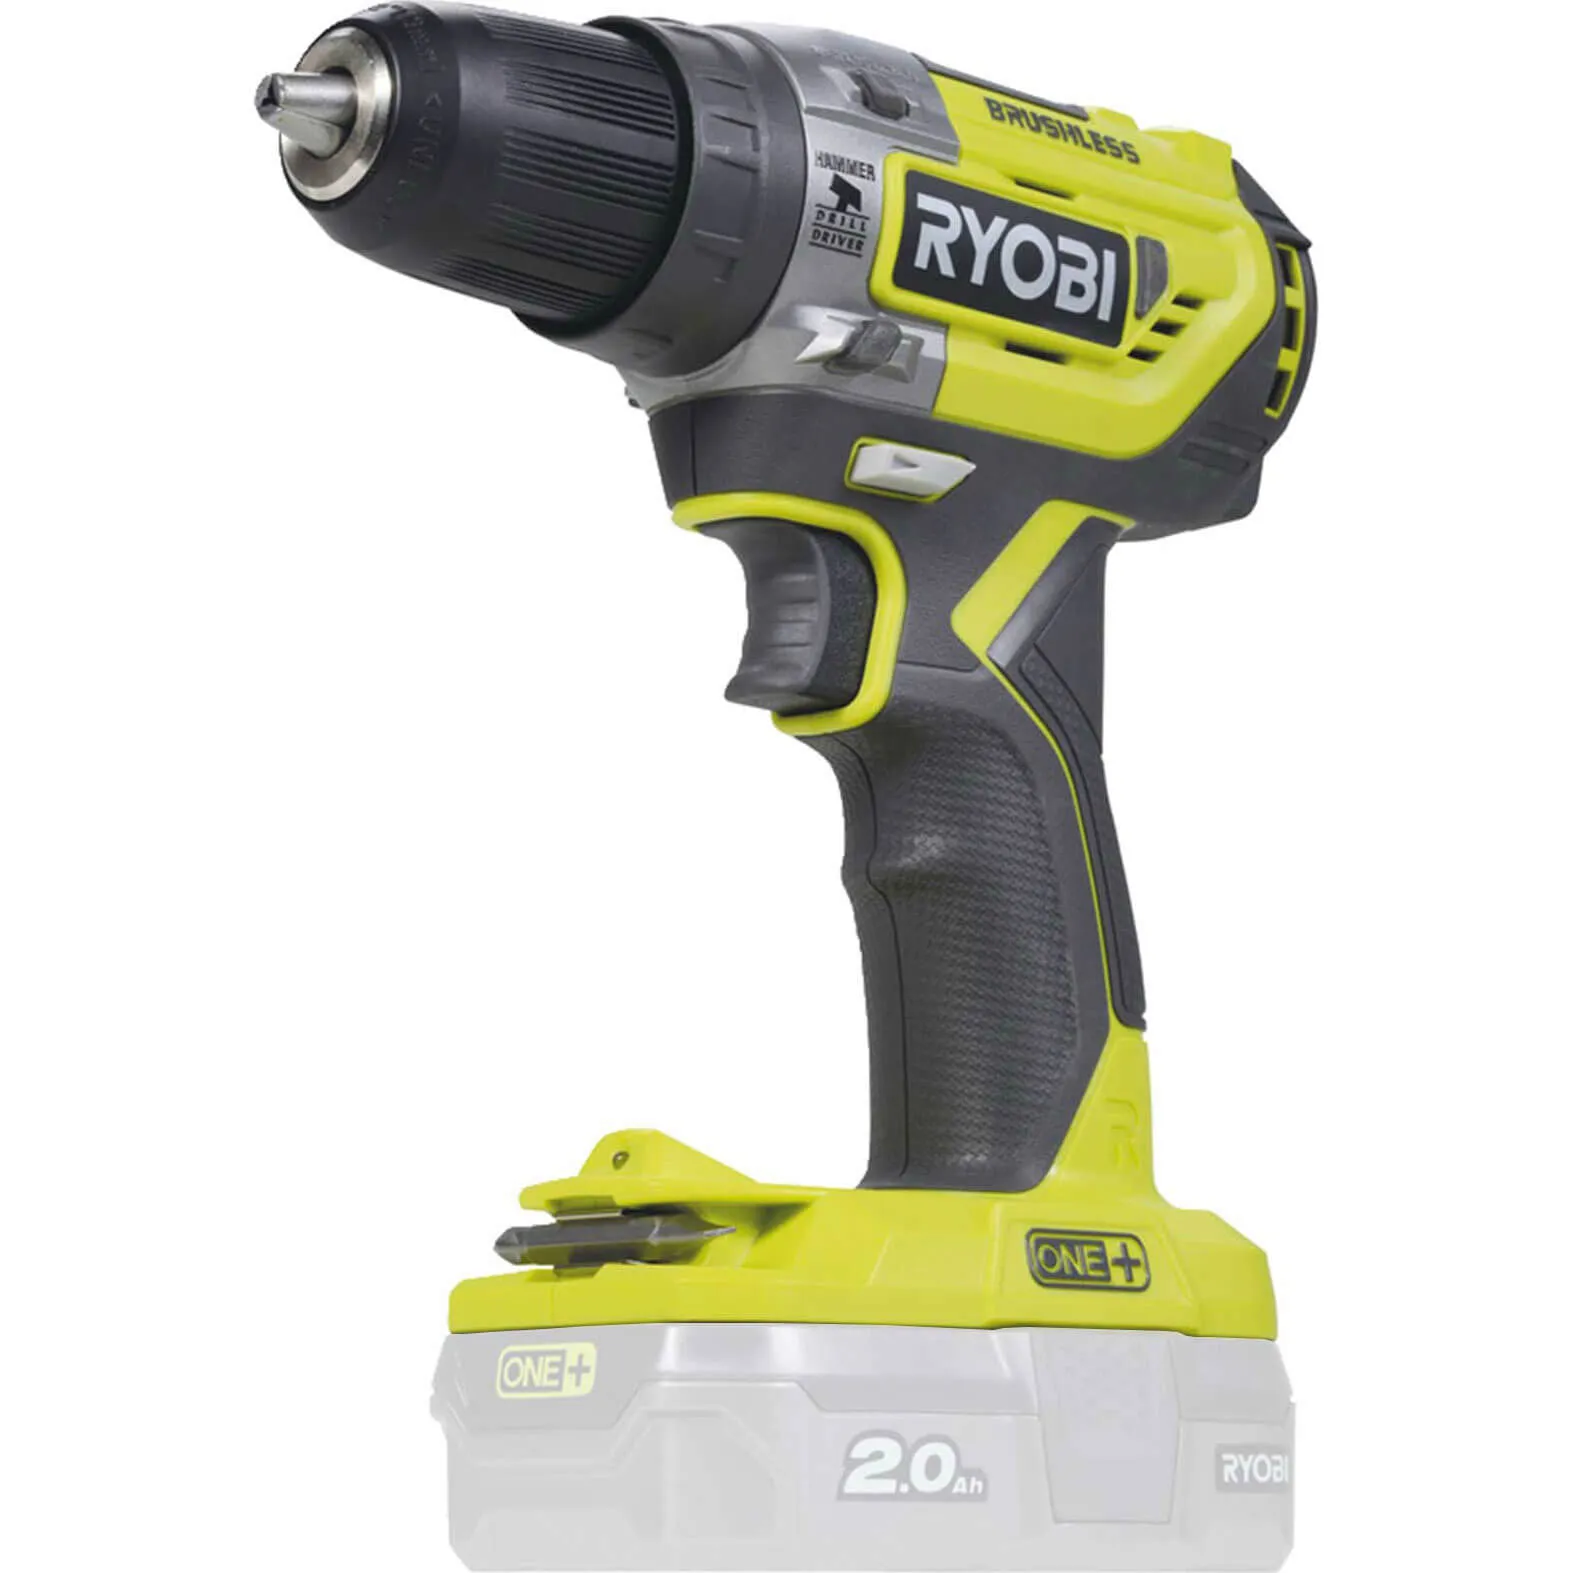 Ryobi R18PD5 ONE+ 18v Cordless Compact Brushless Combi Drill - No Batteries, No Charger, No Case